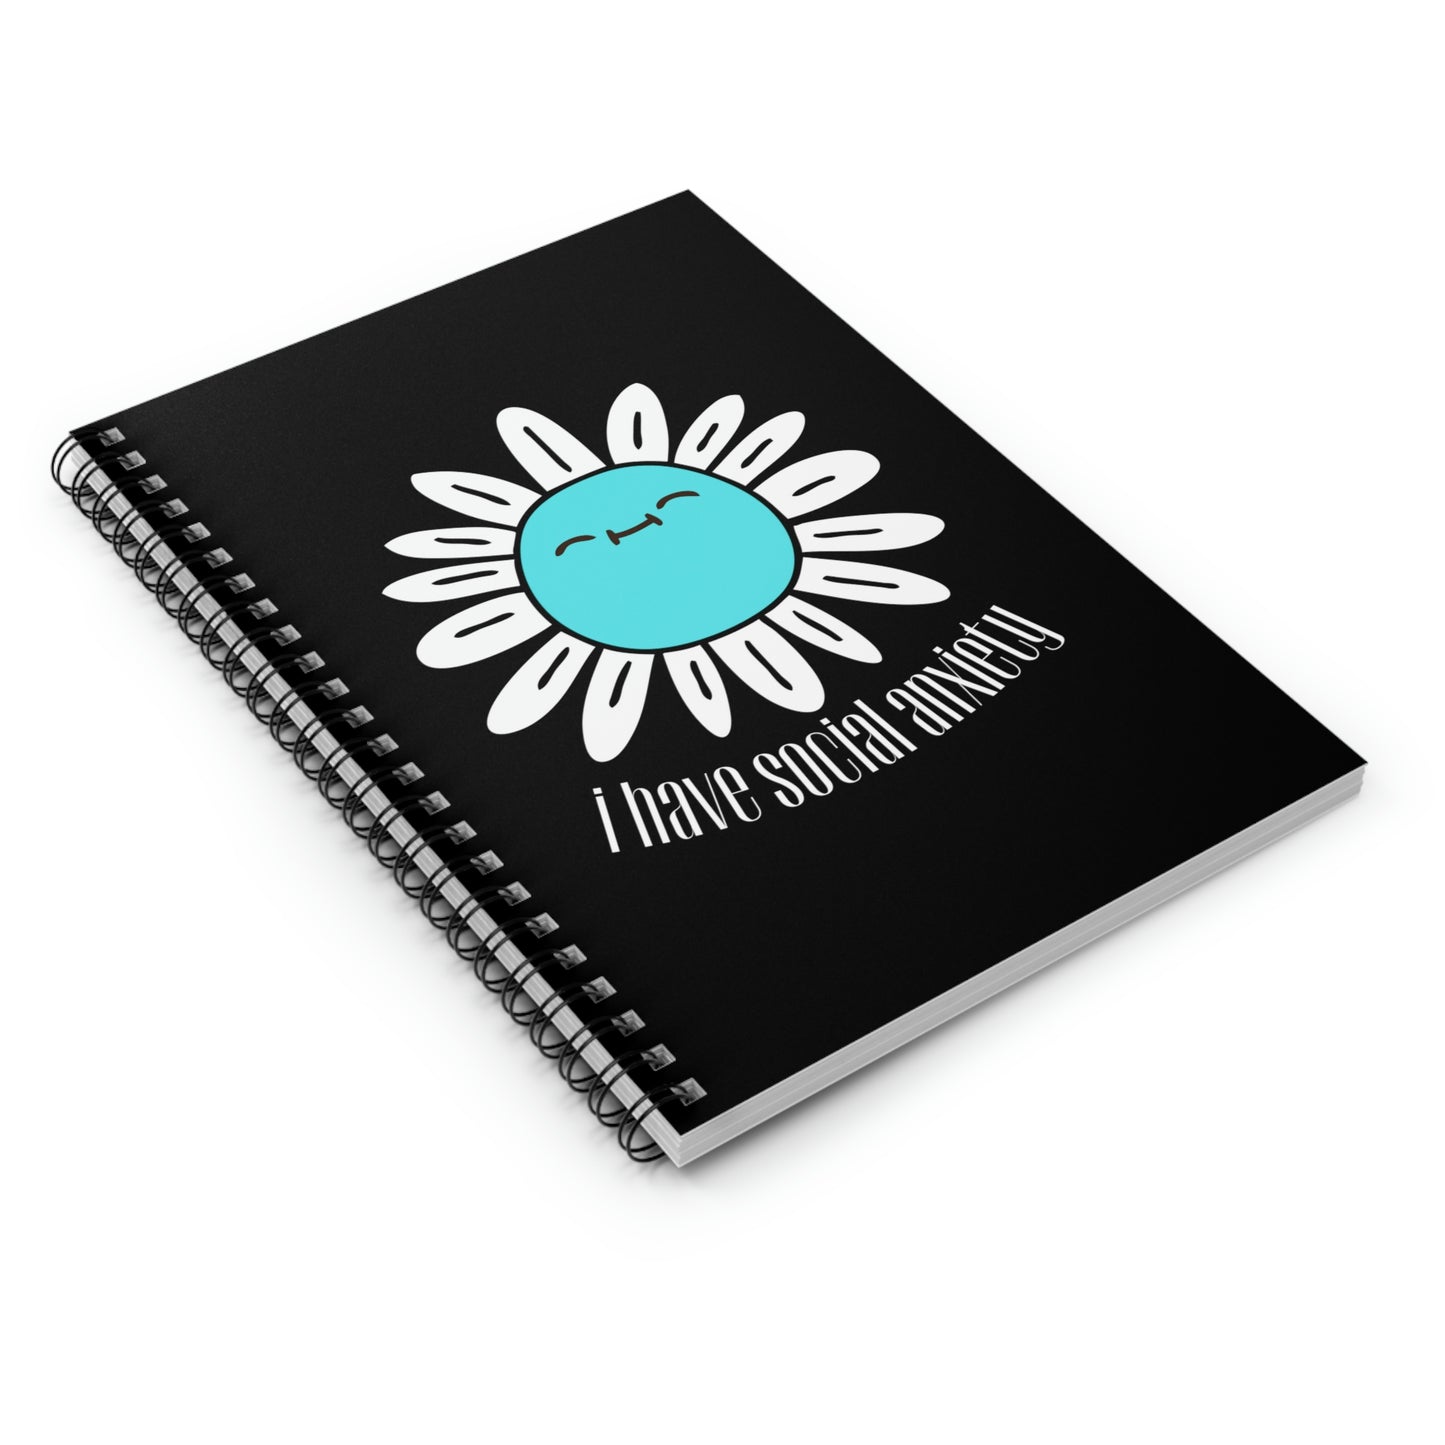 Social Anxiety Spiral Notebook - Ruled Line